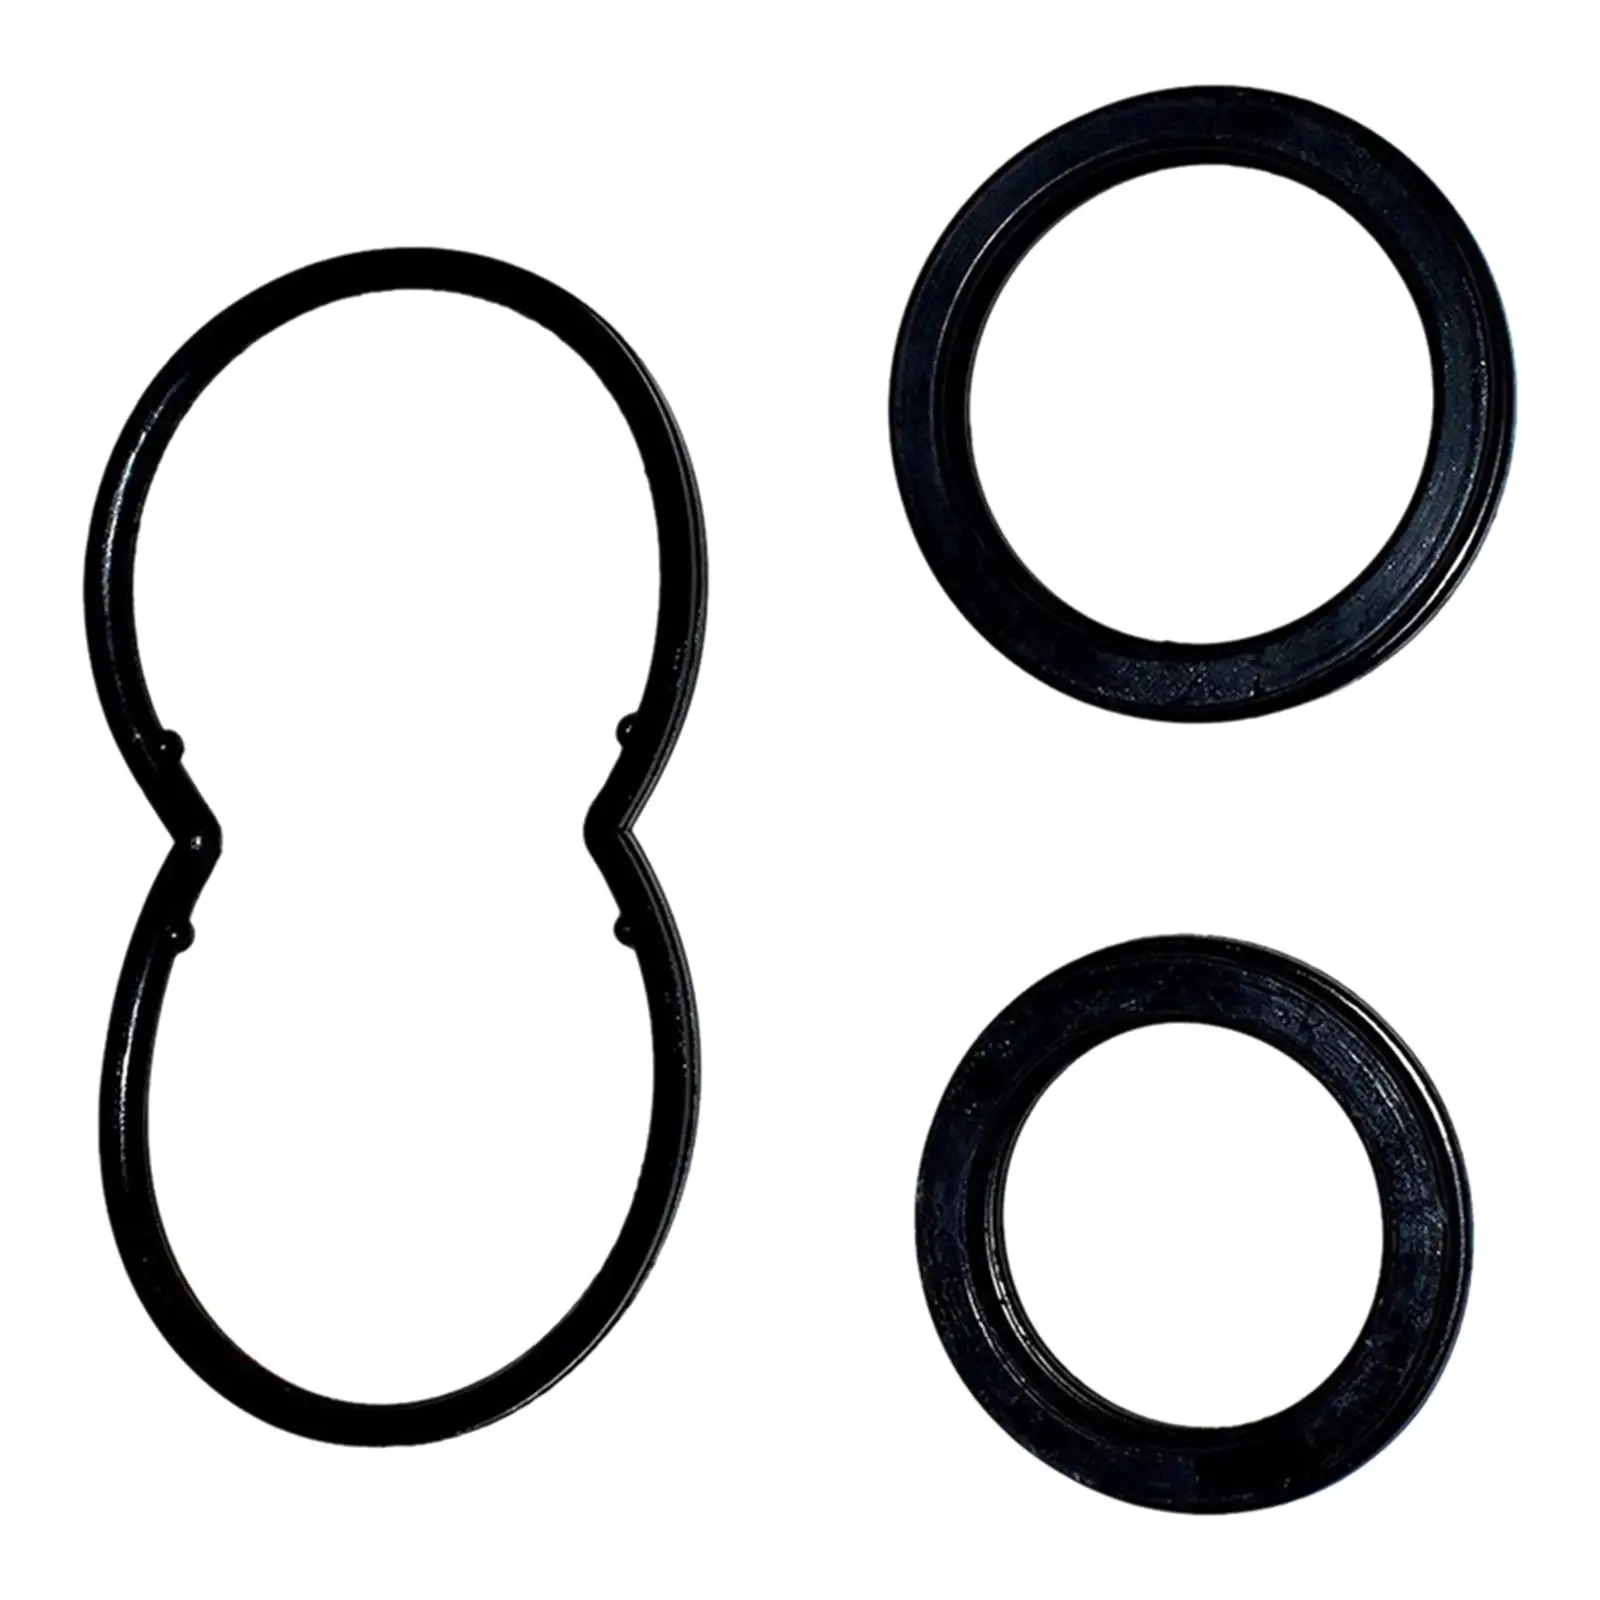 3Pcs Universal Hydro-Boost Leak Seal Kit 2771004 Replacement for Ford for Chevy